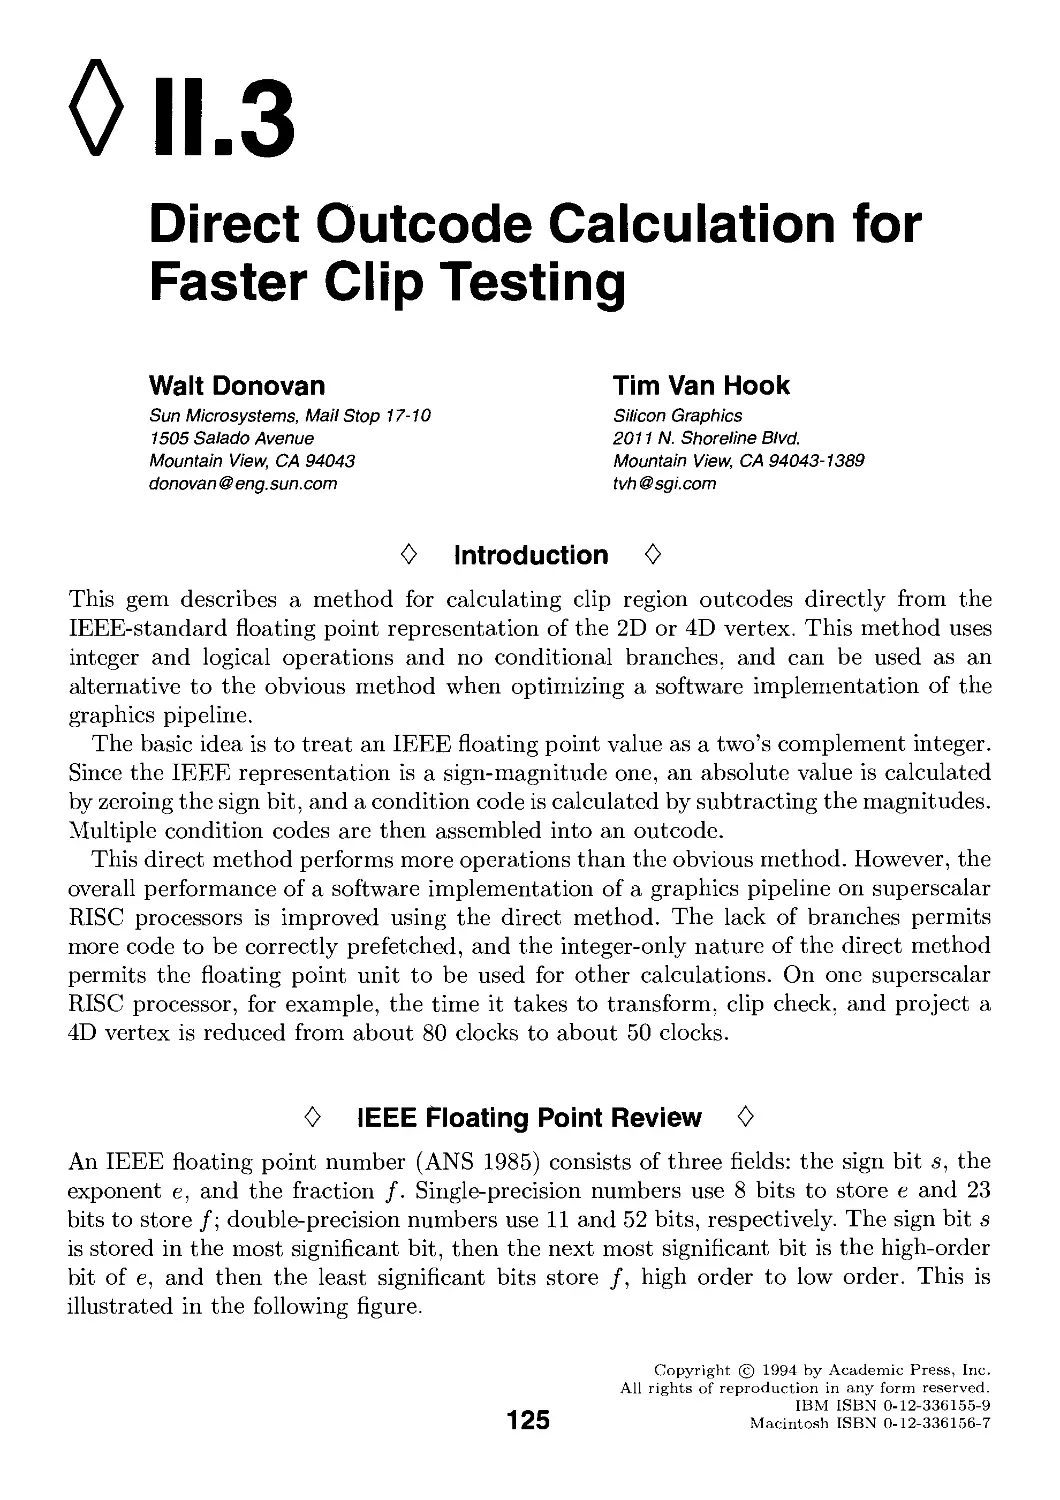 II.3. Direct Outcode Calculation for Faster Clip Testing by Walt Donovan and Tim Van Hook